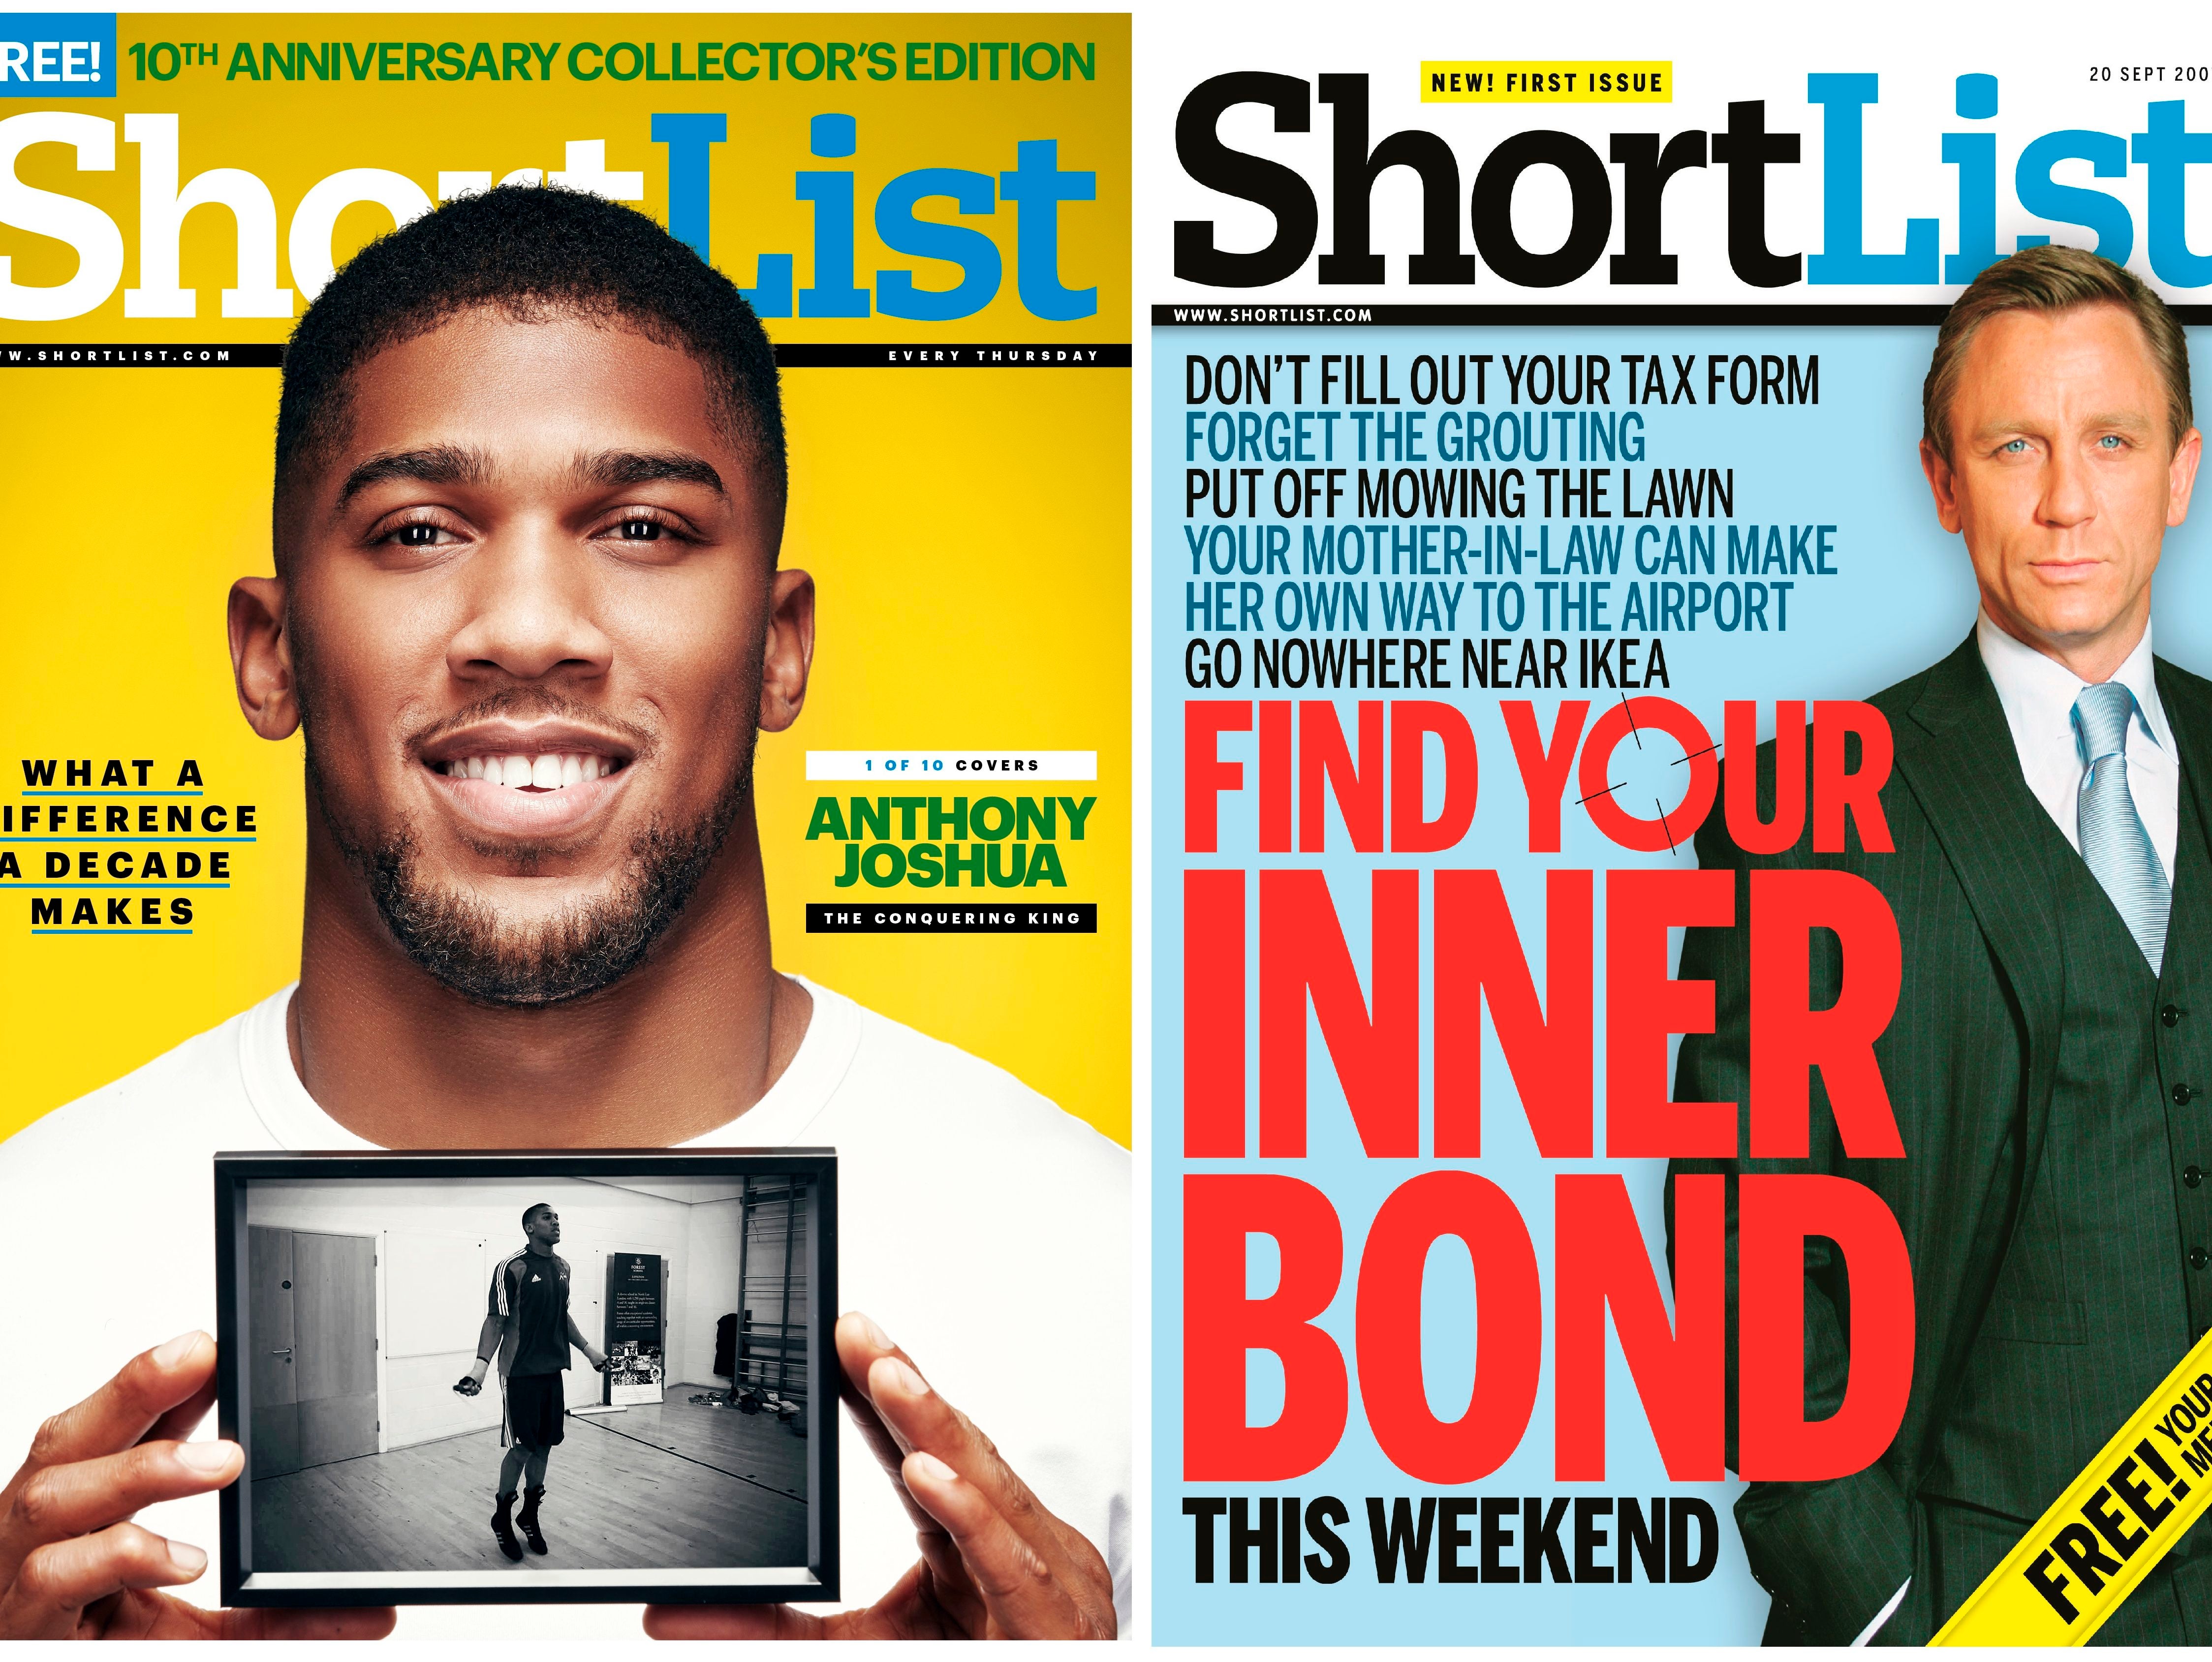 Shortlist shuts print title and rebrands as Stylist Group to build 'power brand' for women